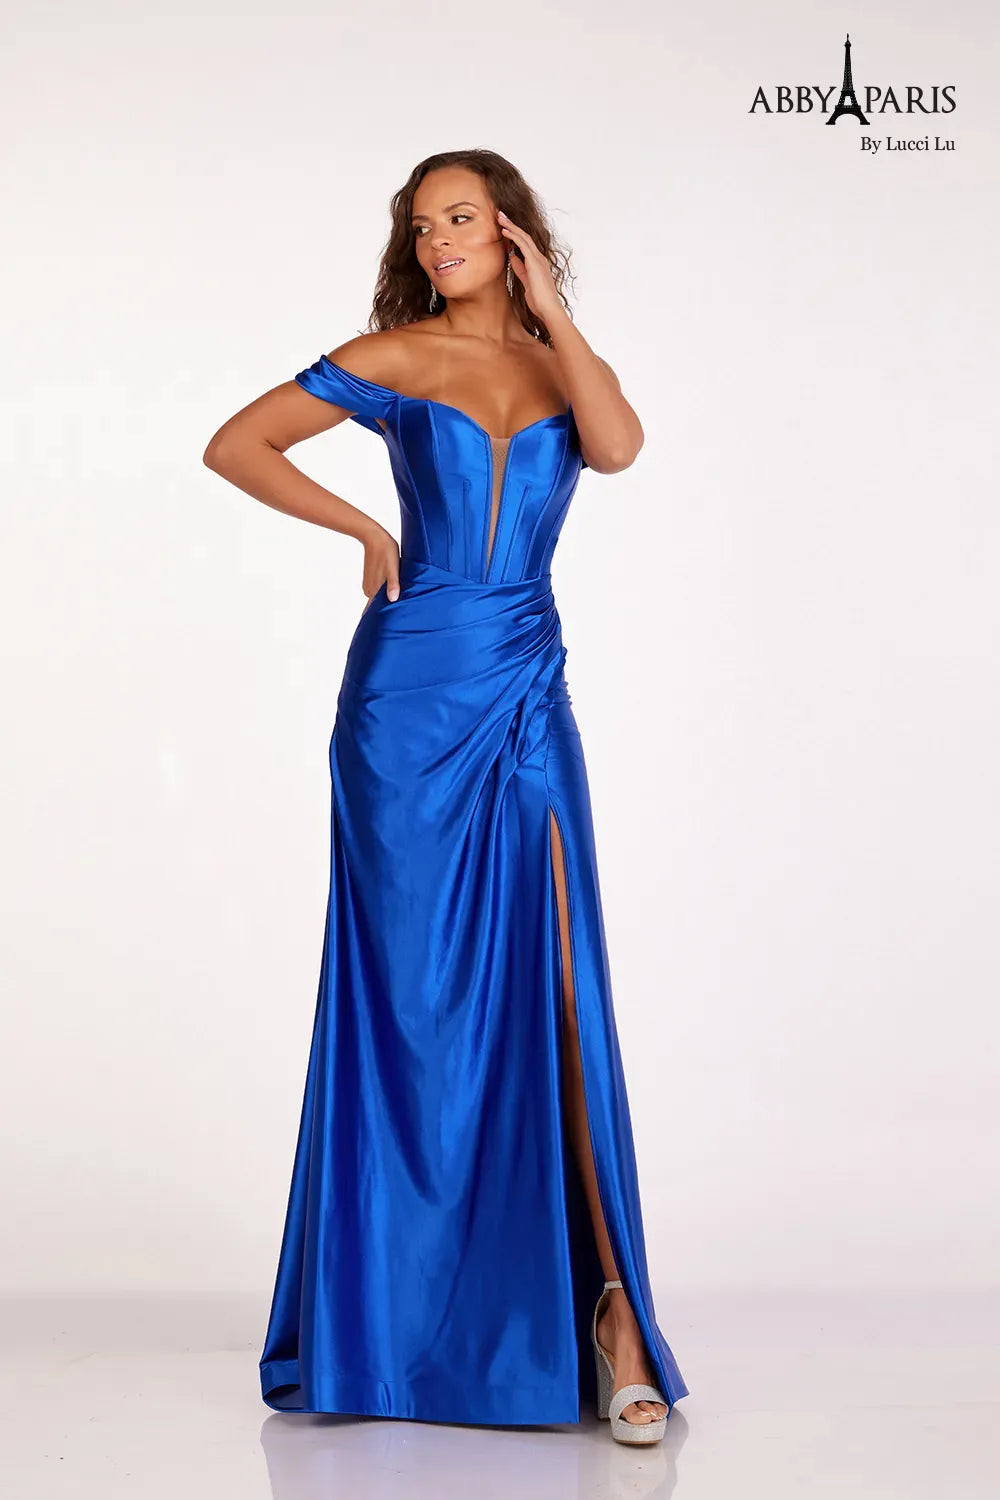 Abby Paris 90216 Size 4 Dusty Blue Satin off the shoulder Ruched slit Prom Dress Evening Gown Bridesmaid